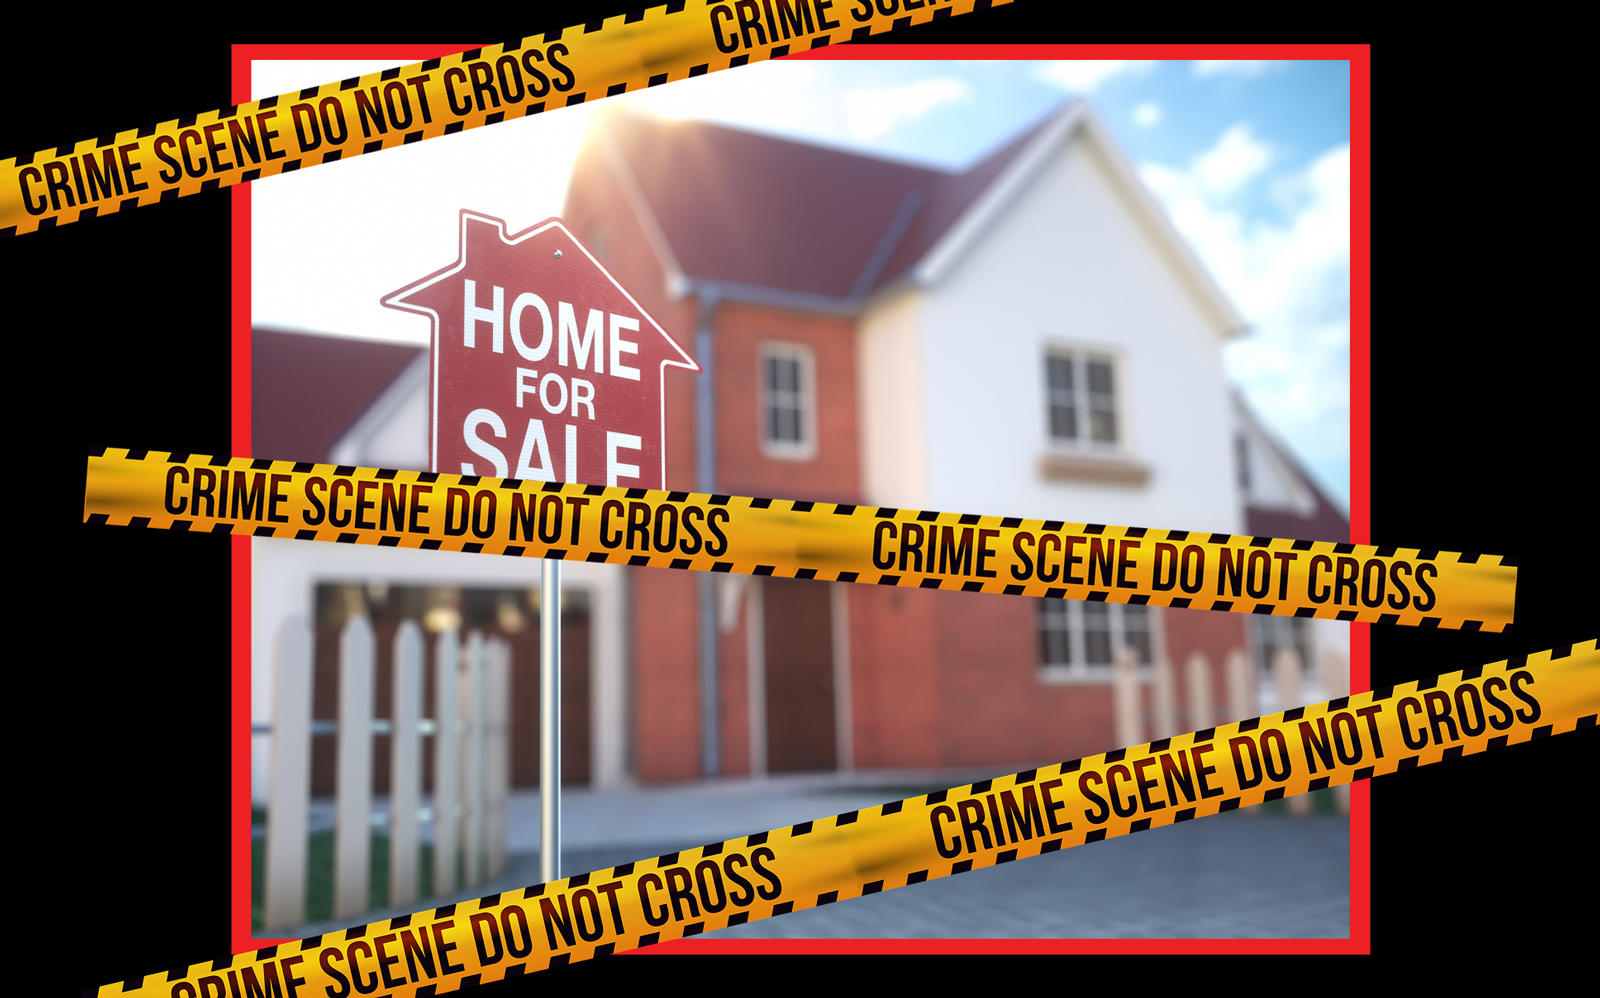 A brutal attack during an open house sent a Virginia real estate agent to the hospital with several skull fractures. (iStock)